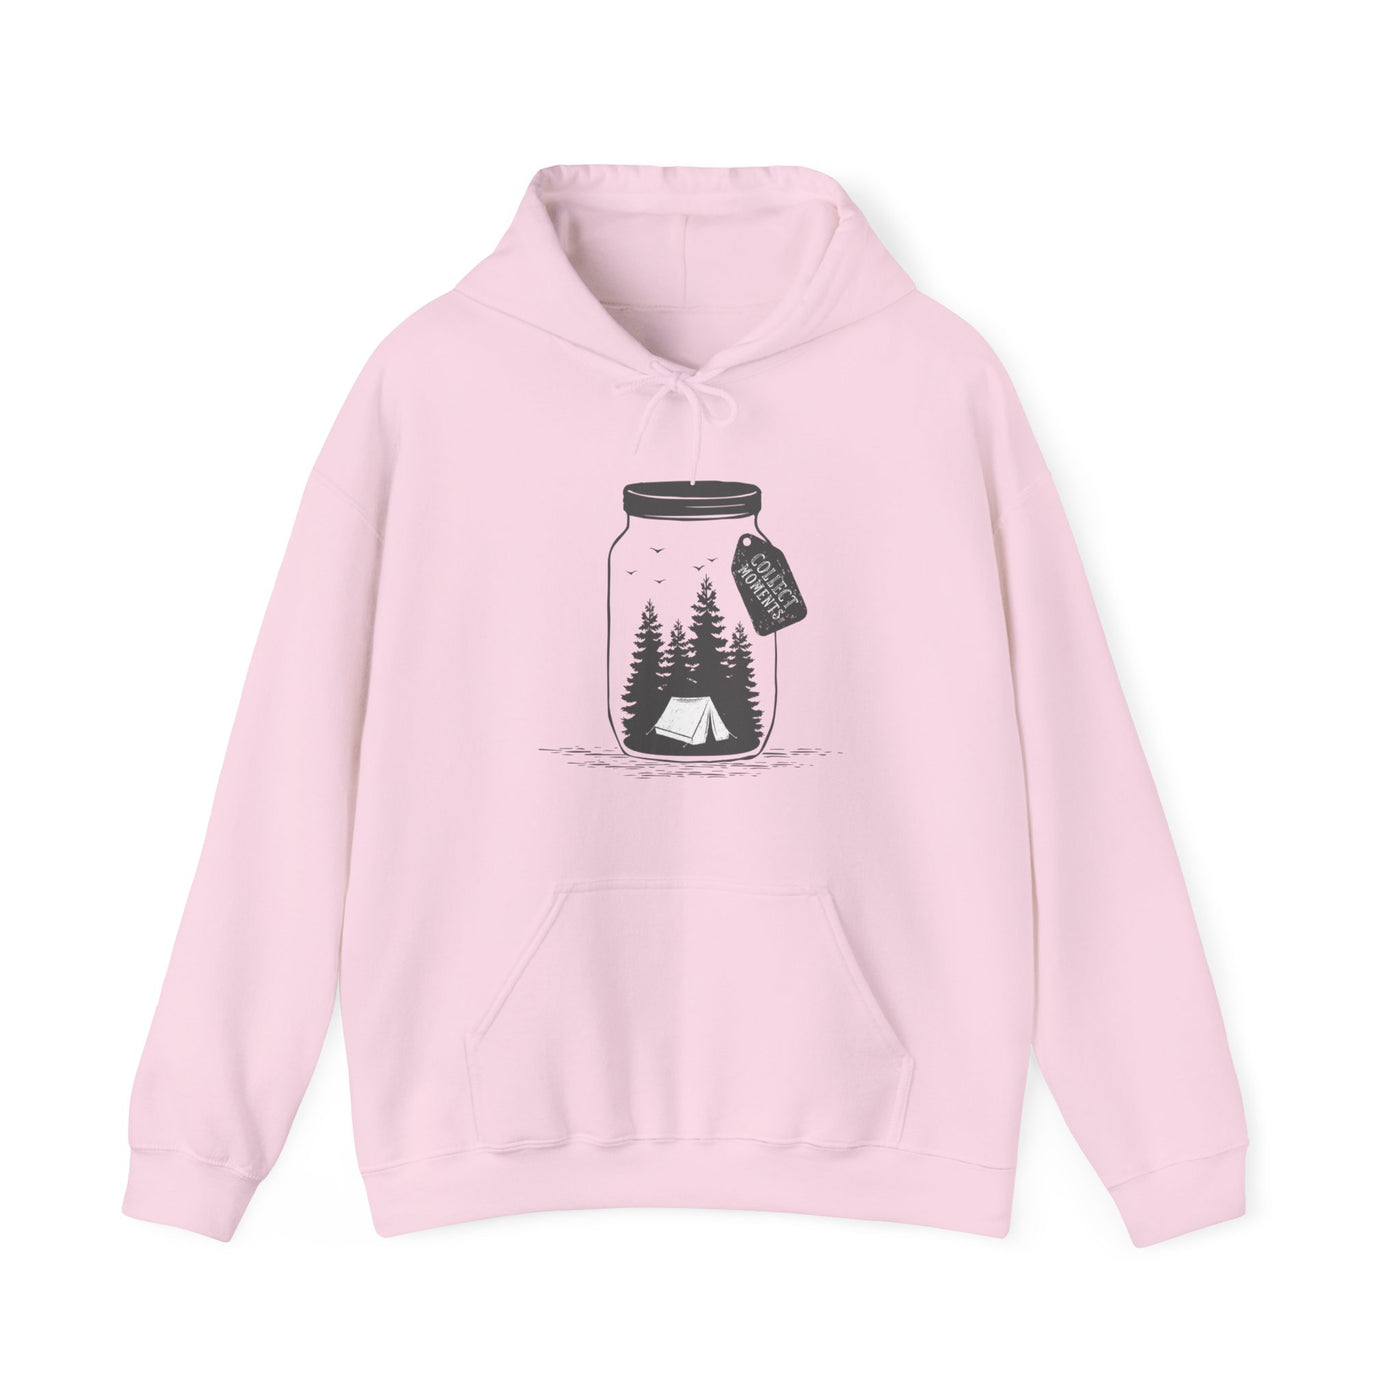 Collect Moments Not Things Hooded Sweatshirt